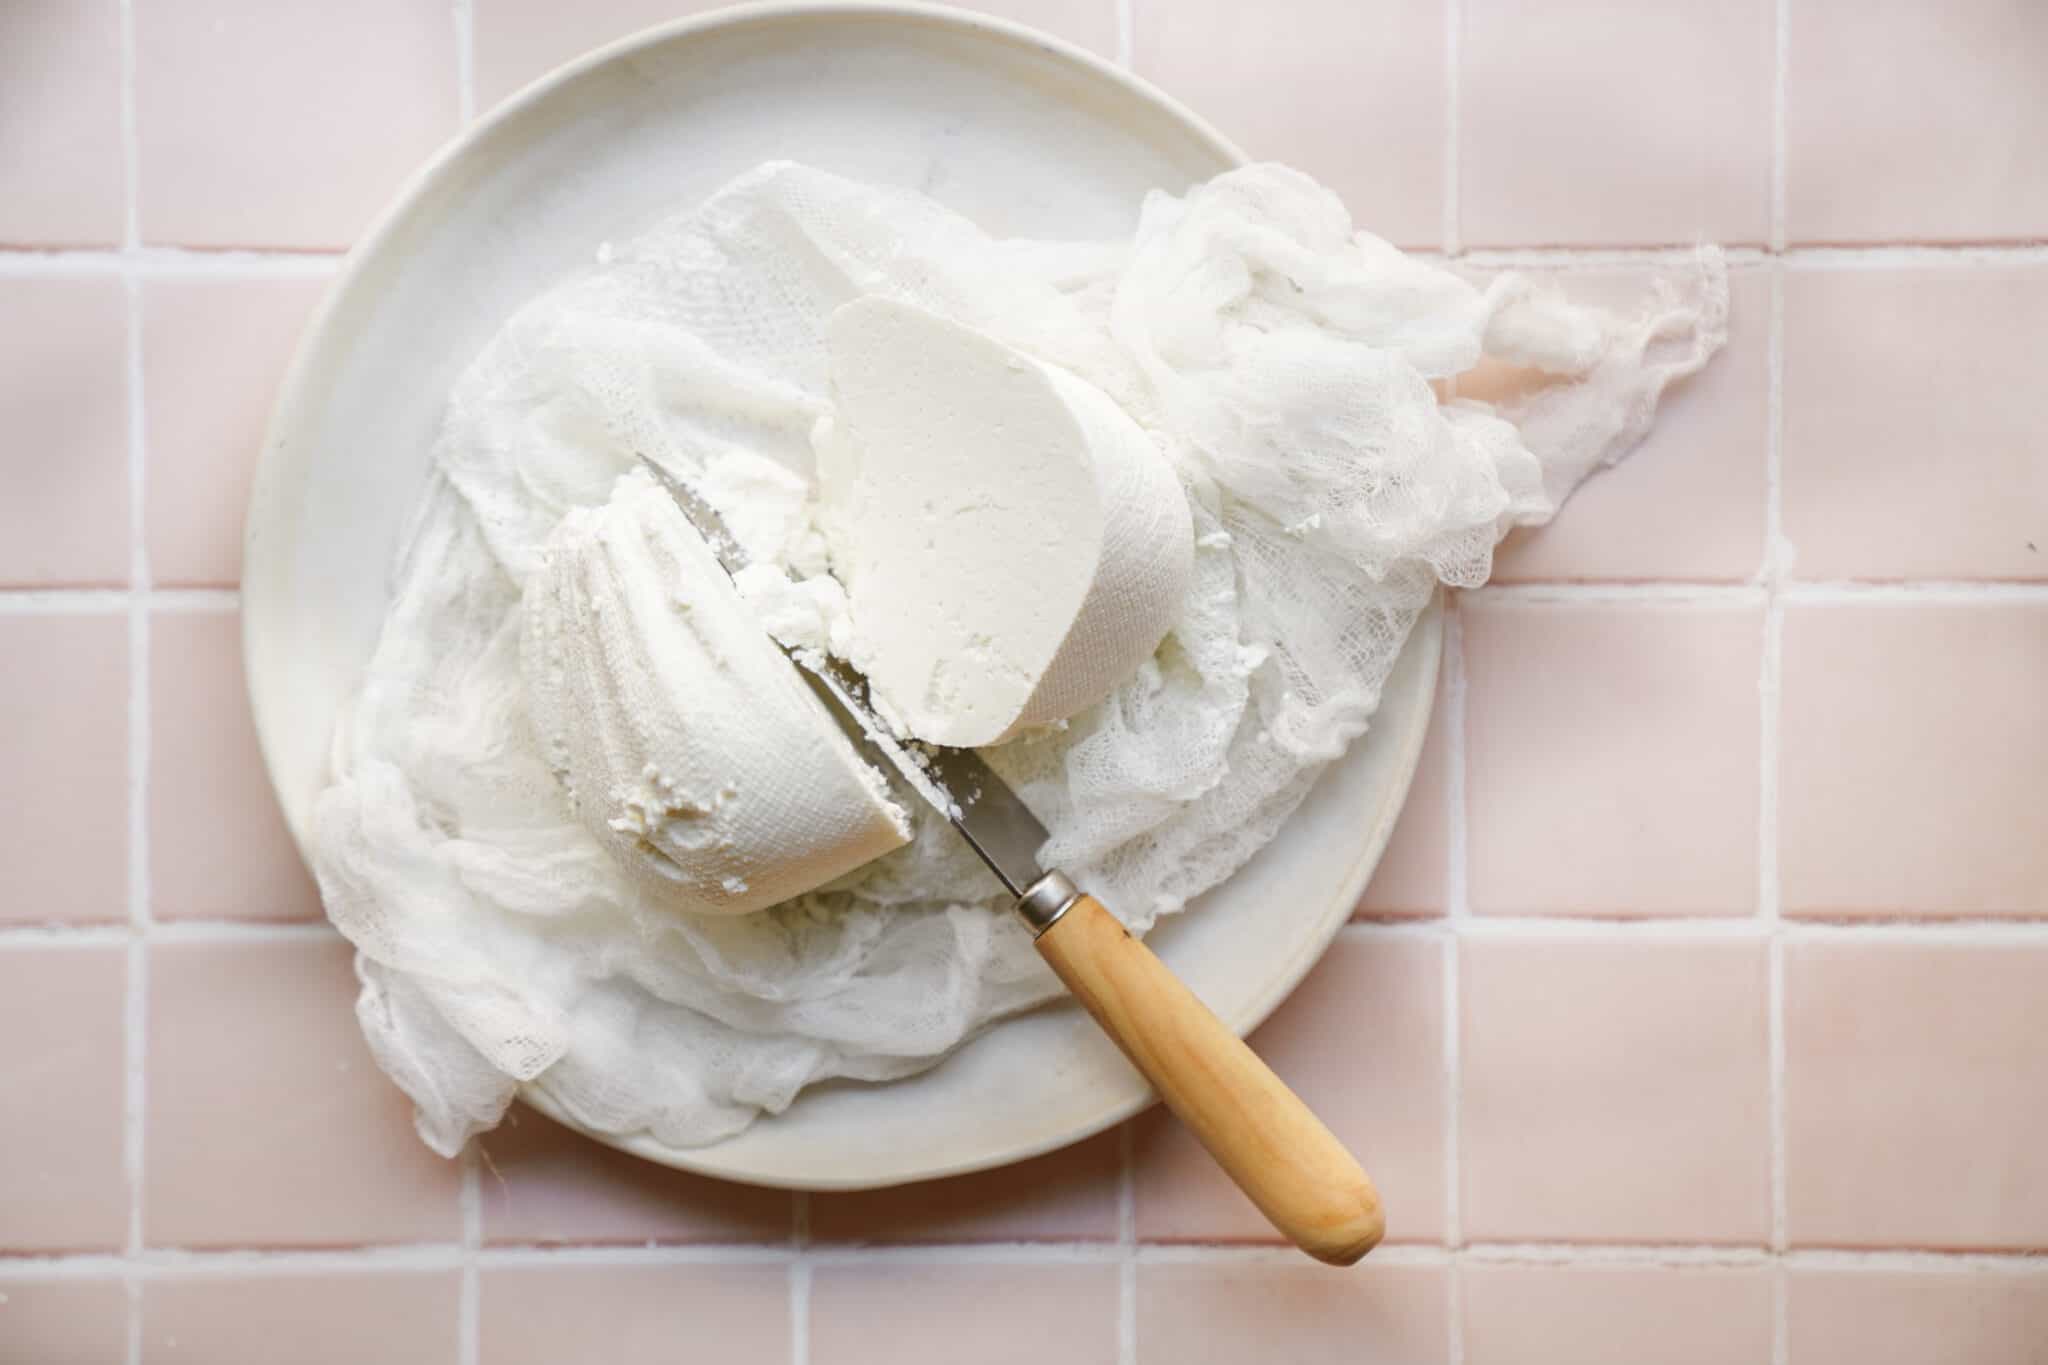 Knife cutting into labneh